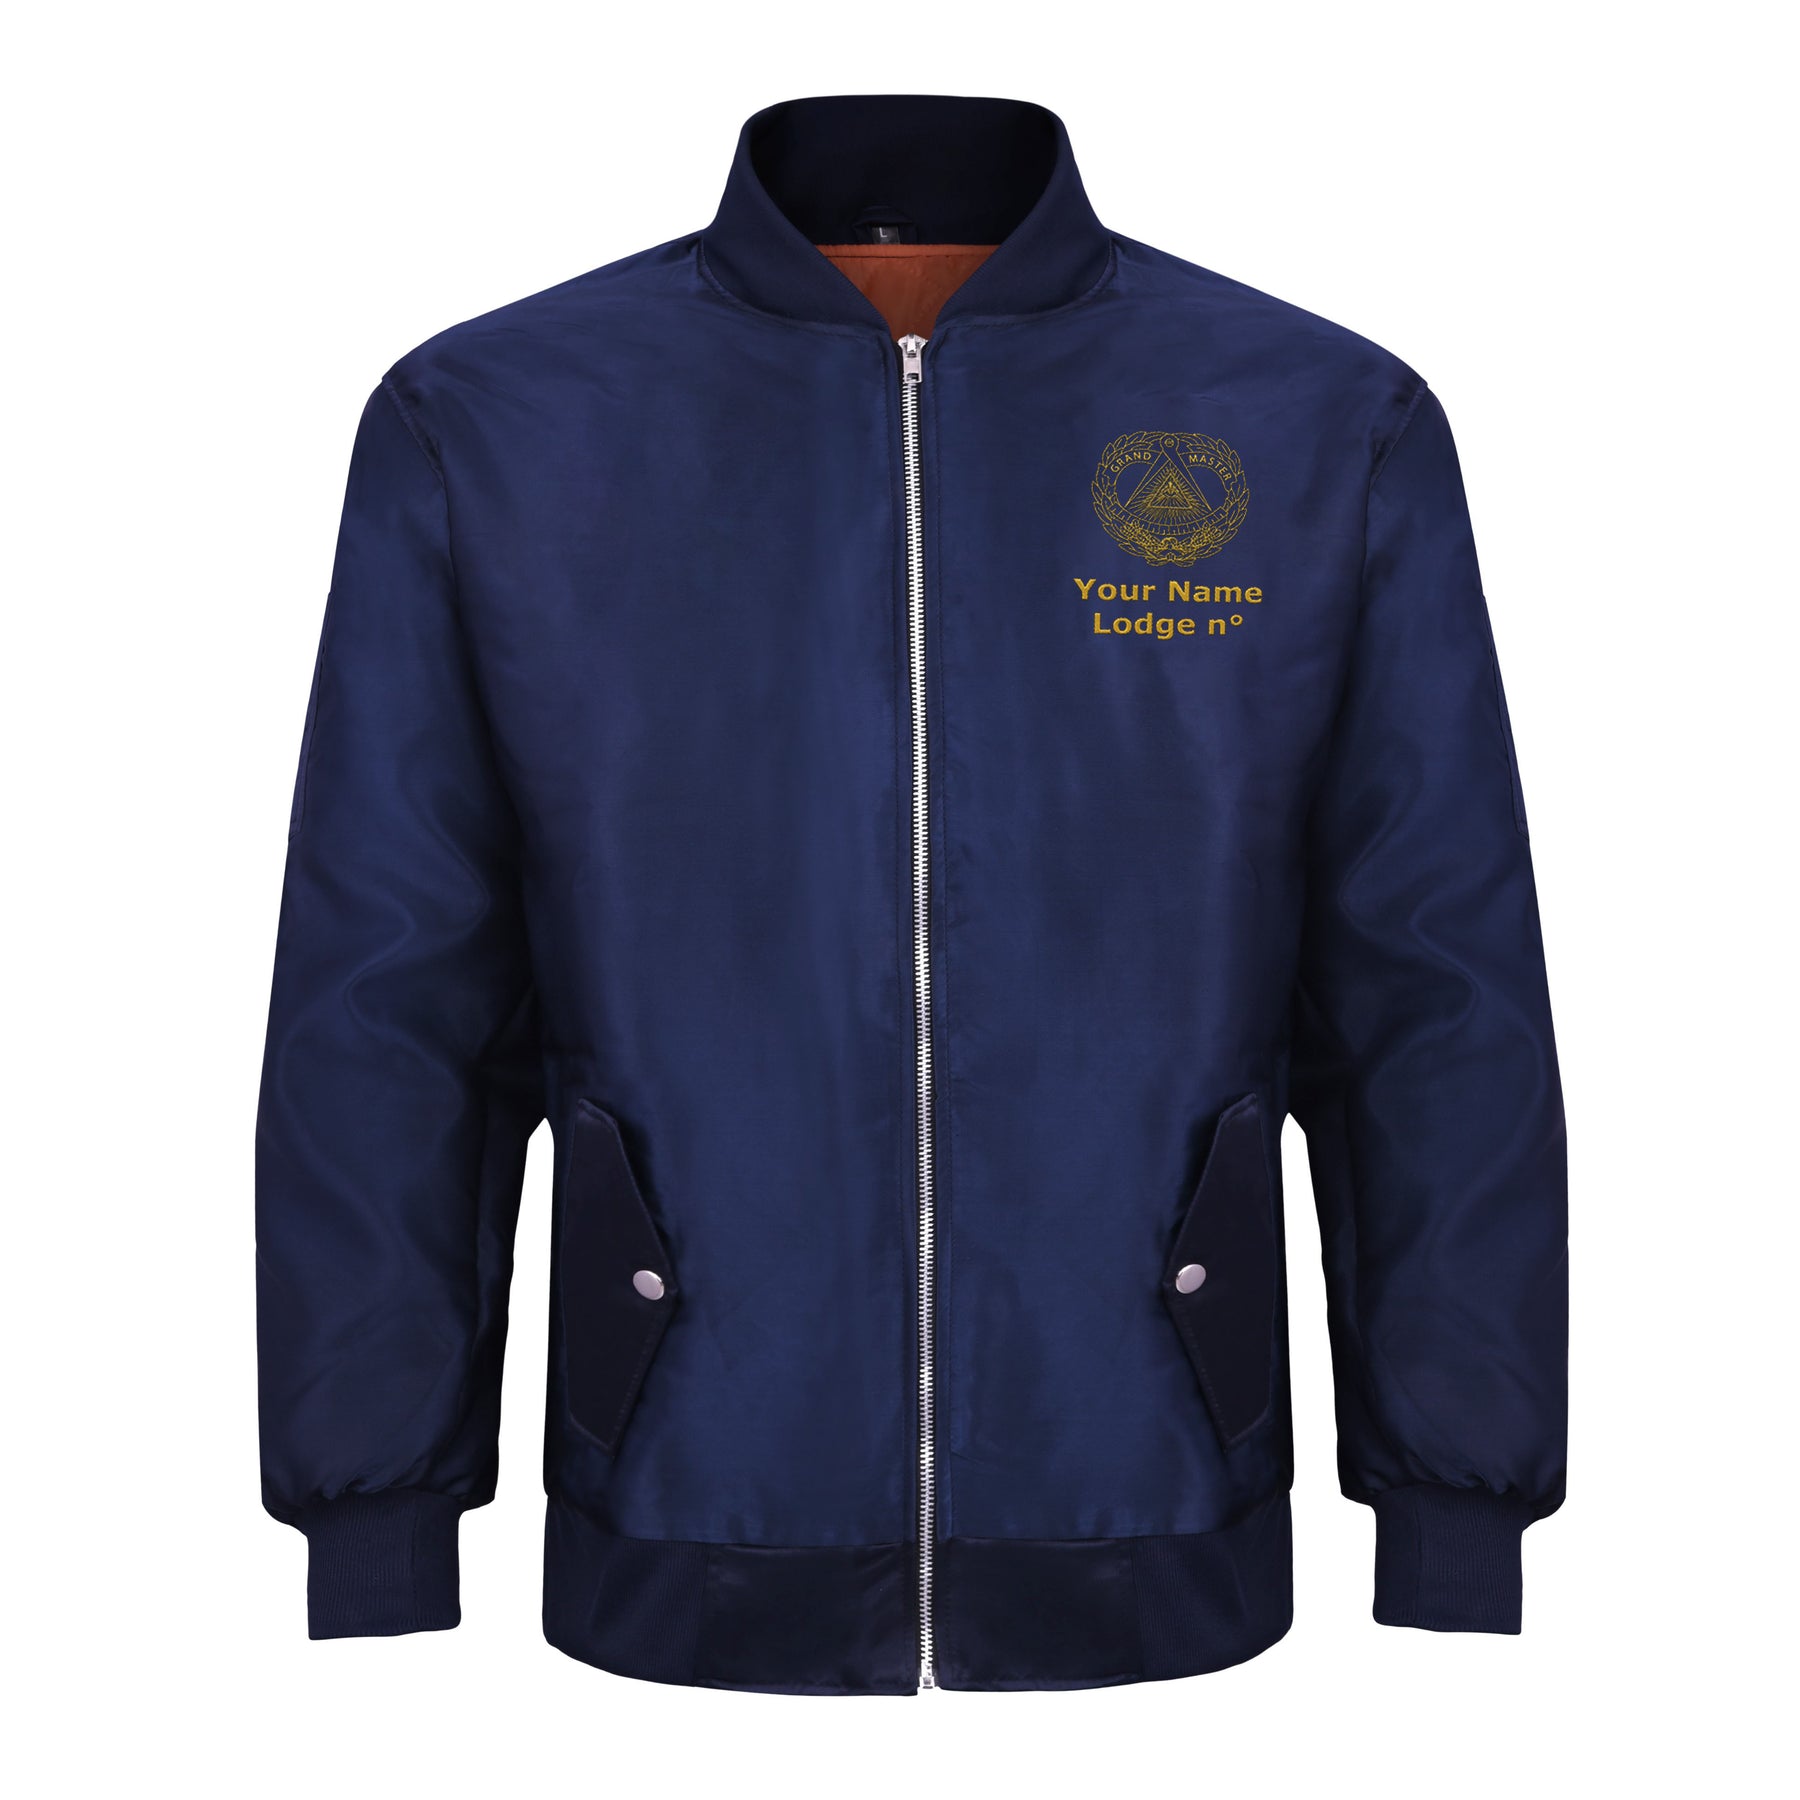 Grand Master Blue Lodge Jacket - Blue Color With Gold Embroidery - Bricks Masons